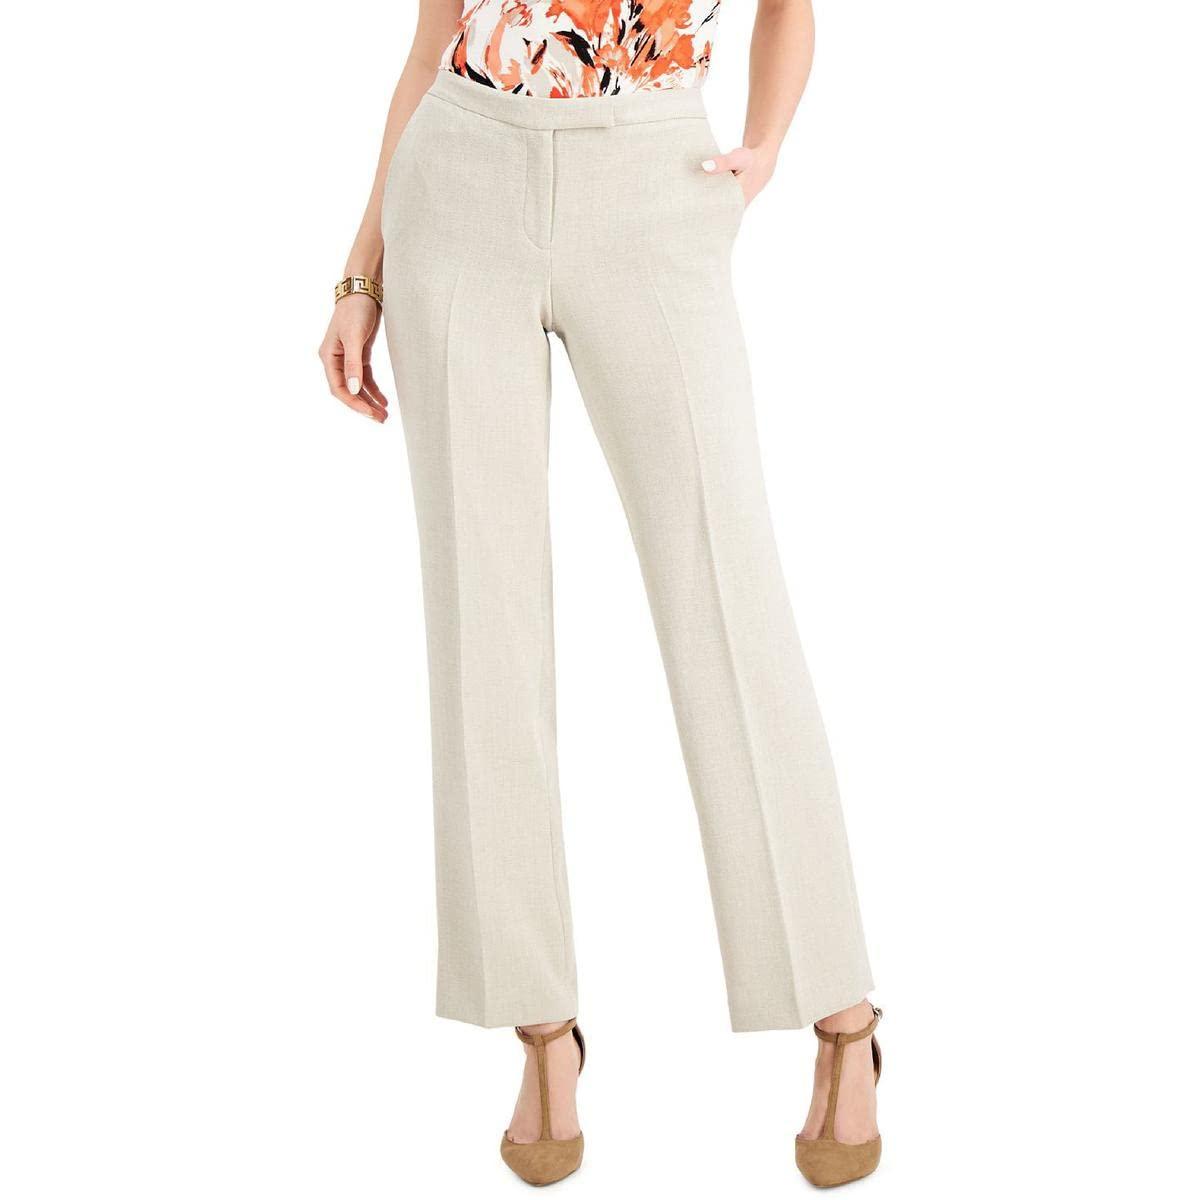 Kasper Pebble Stretch Crepe Unlined Pant With Slit Pockets in Natural ...